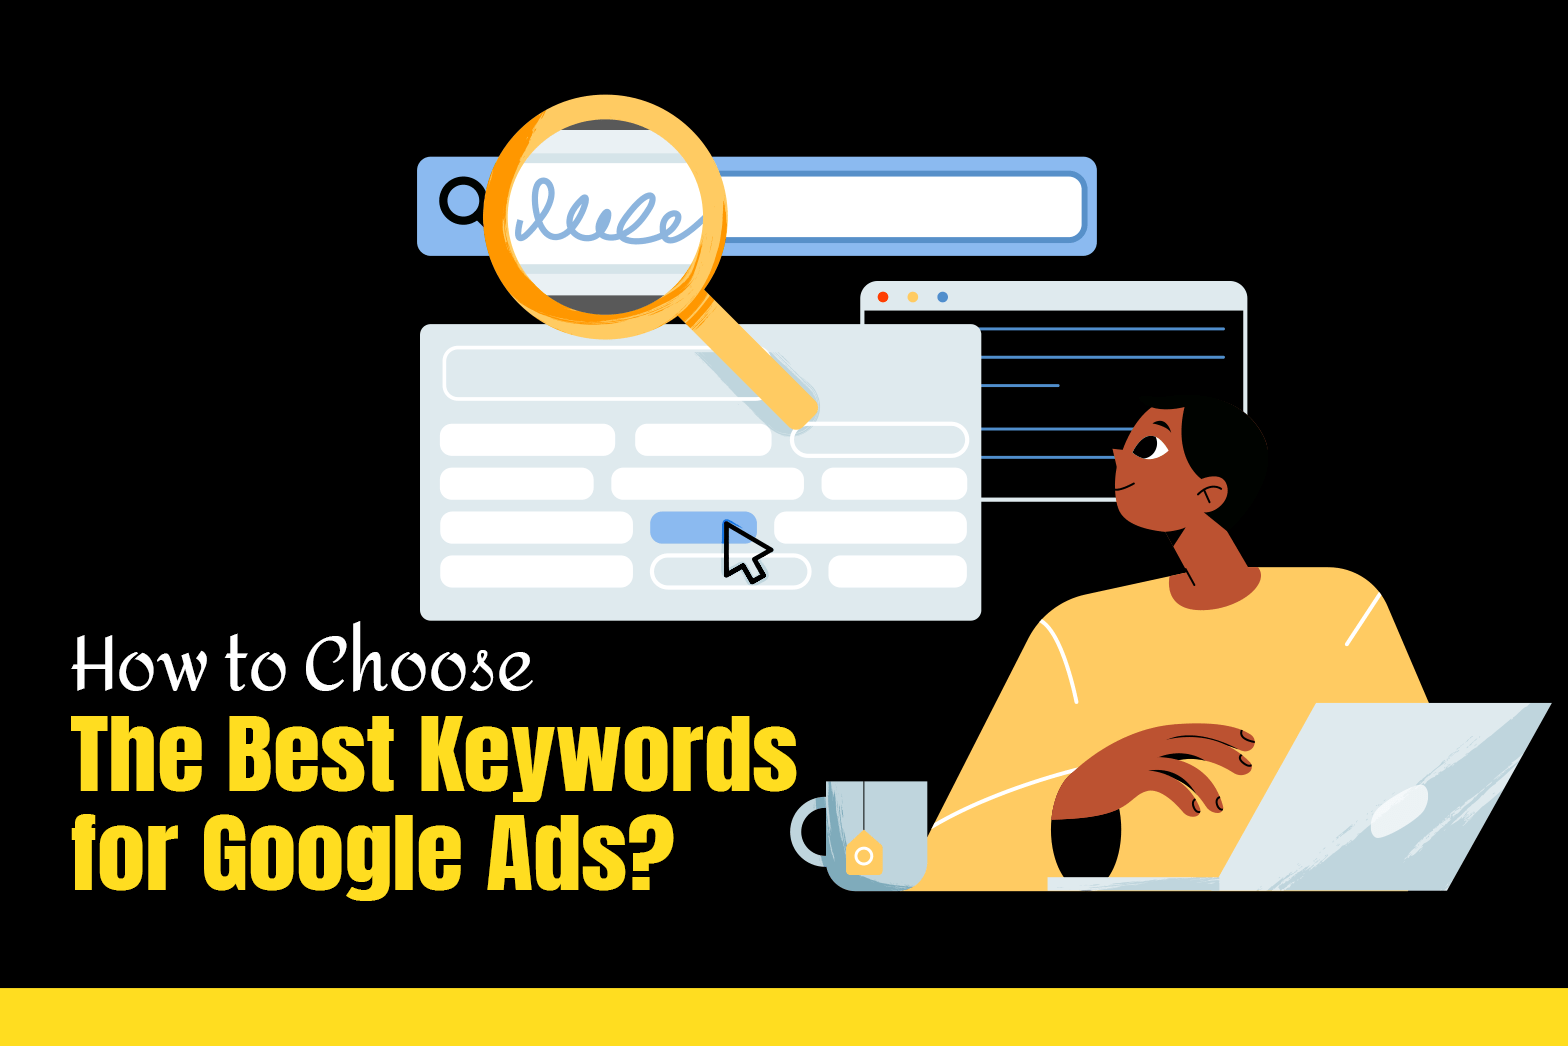 How to Choose the Best Keywords for Google Ads?